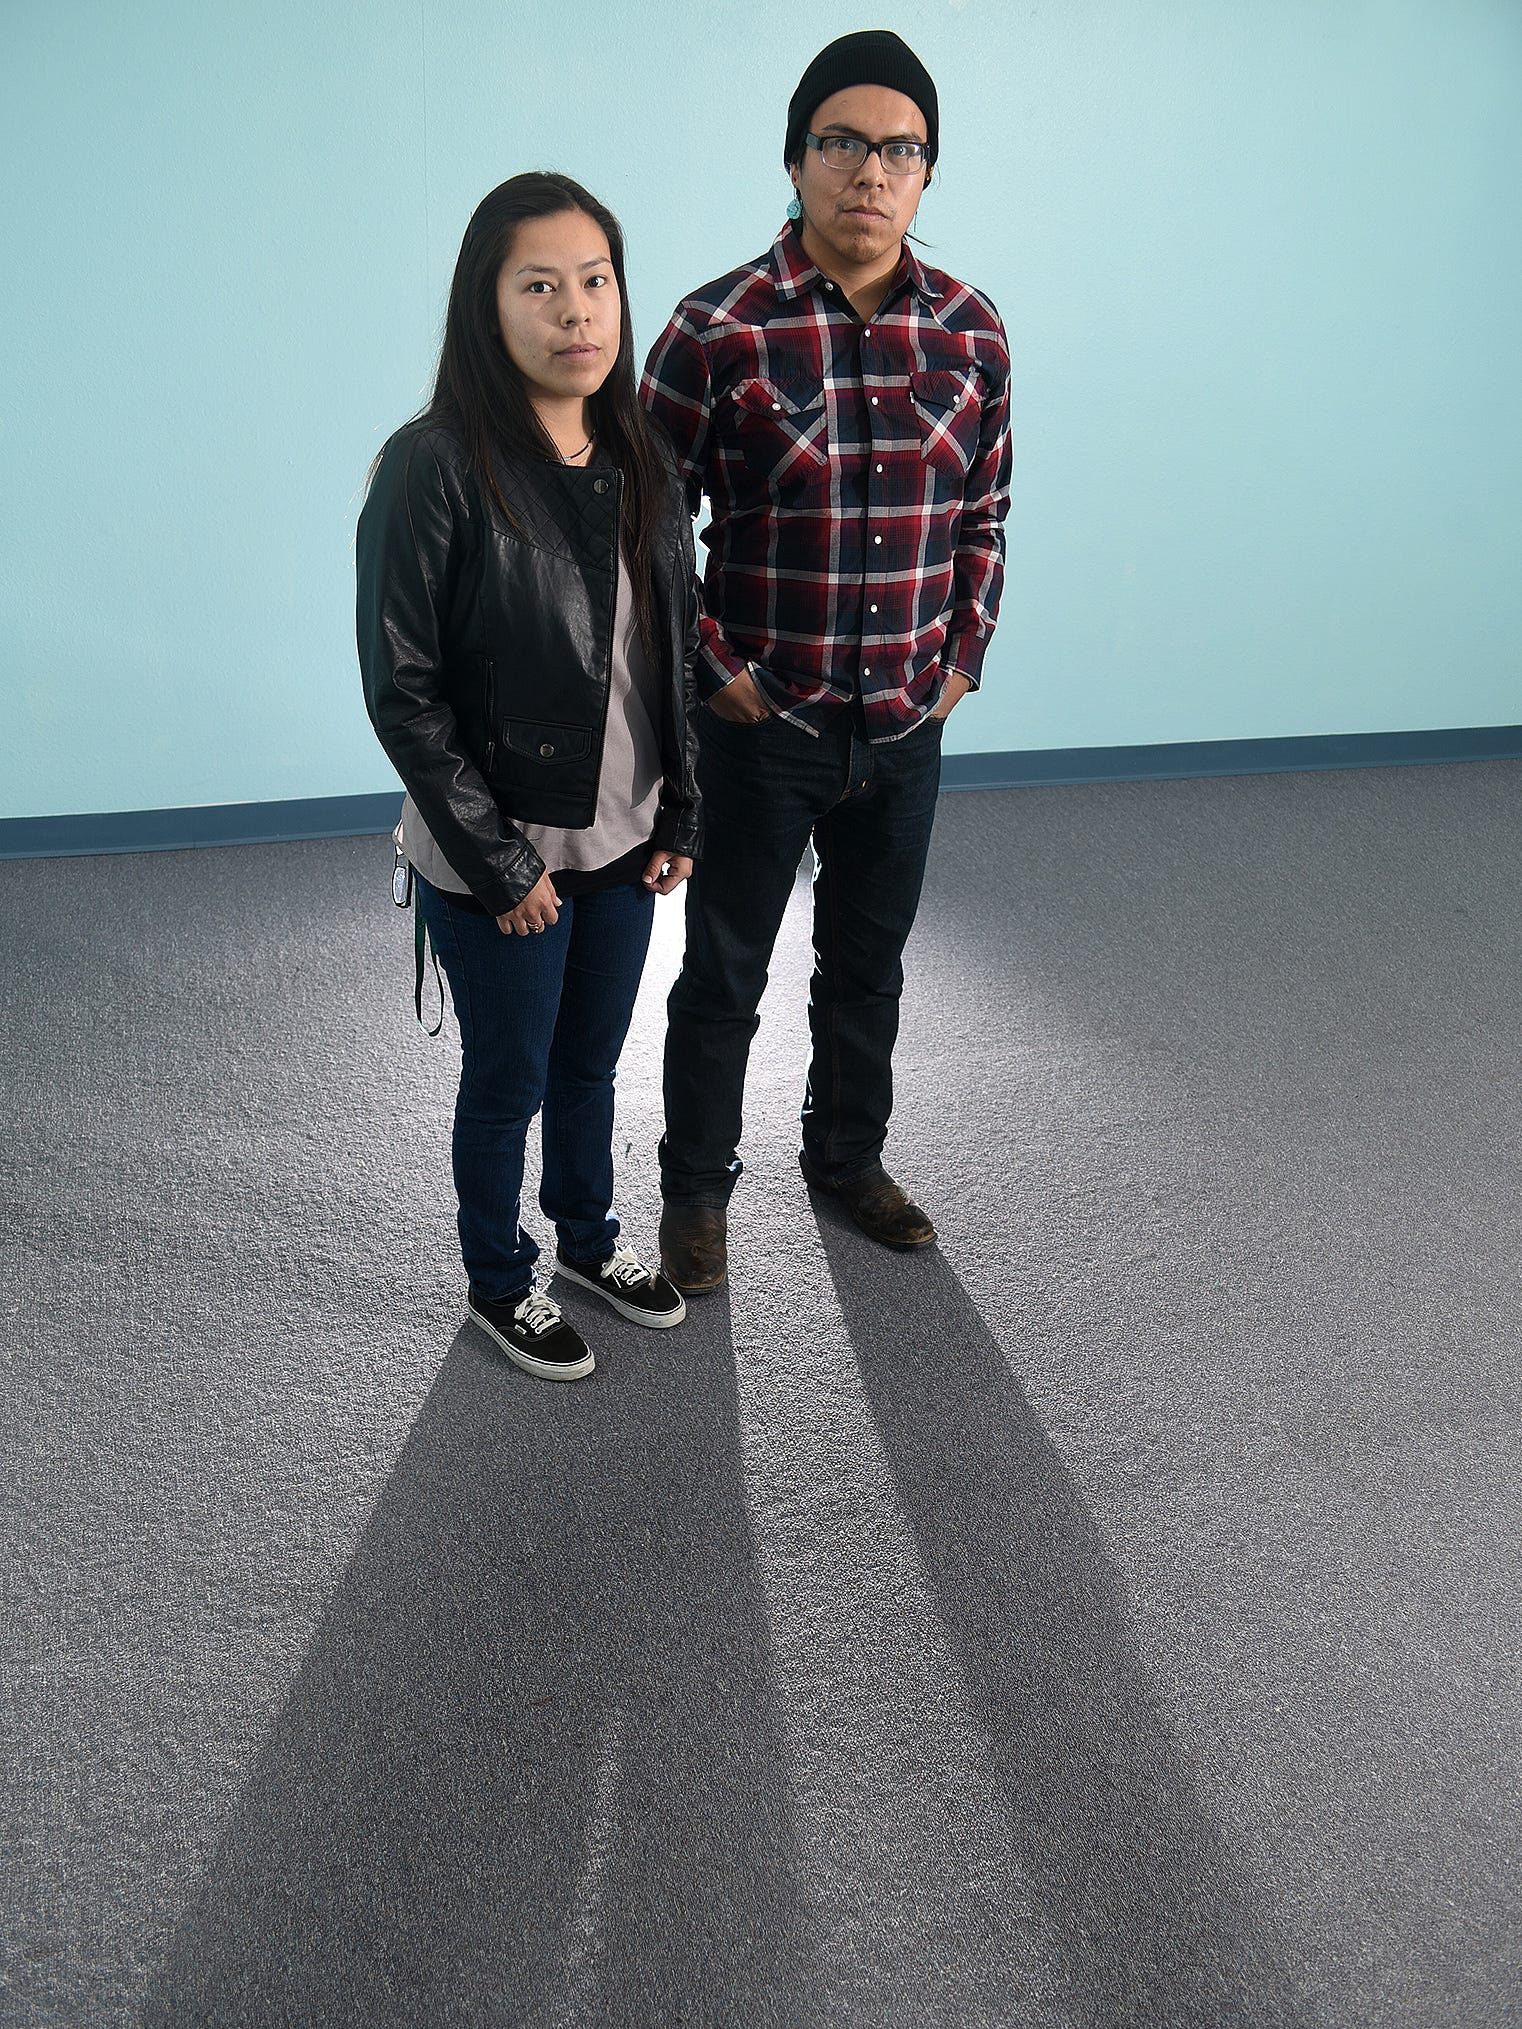 Shiprock natives and siblings Kolette and Kody Dayish are two of the three partners in Kody Dayish Productions, an independent film company that has produced the award-winning short "The Beginning."